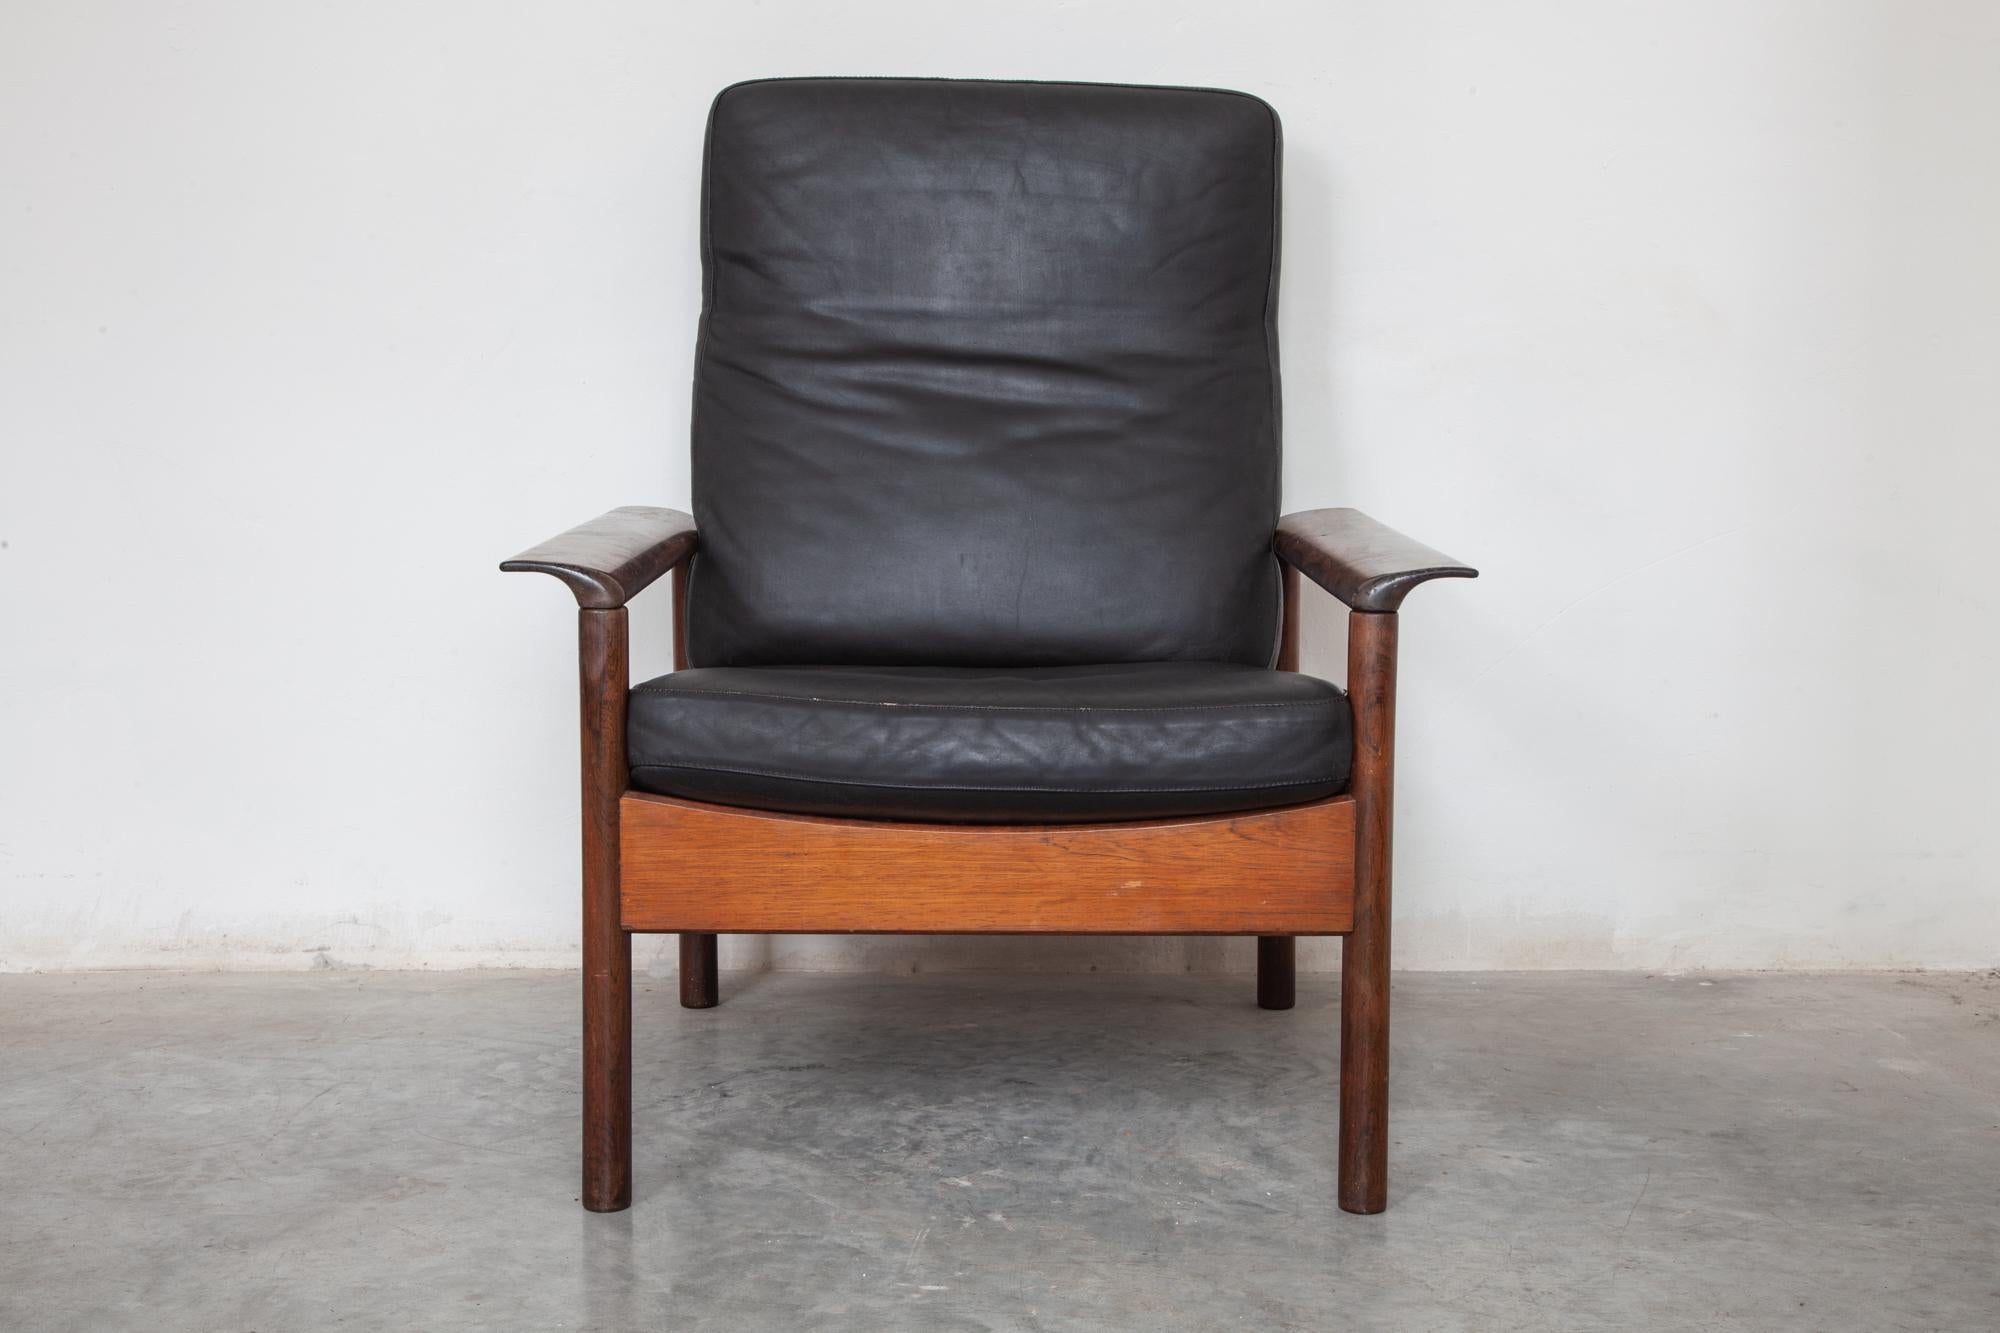 Fifties lounge chair set by Gervan, Belgium. Two high back and two low back chairs. Elegant wood frame with wide sculpted armrests. 
The cushions rest on rubber banding for the seat and tension string for the backrest. Original black leather